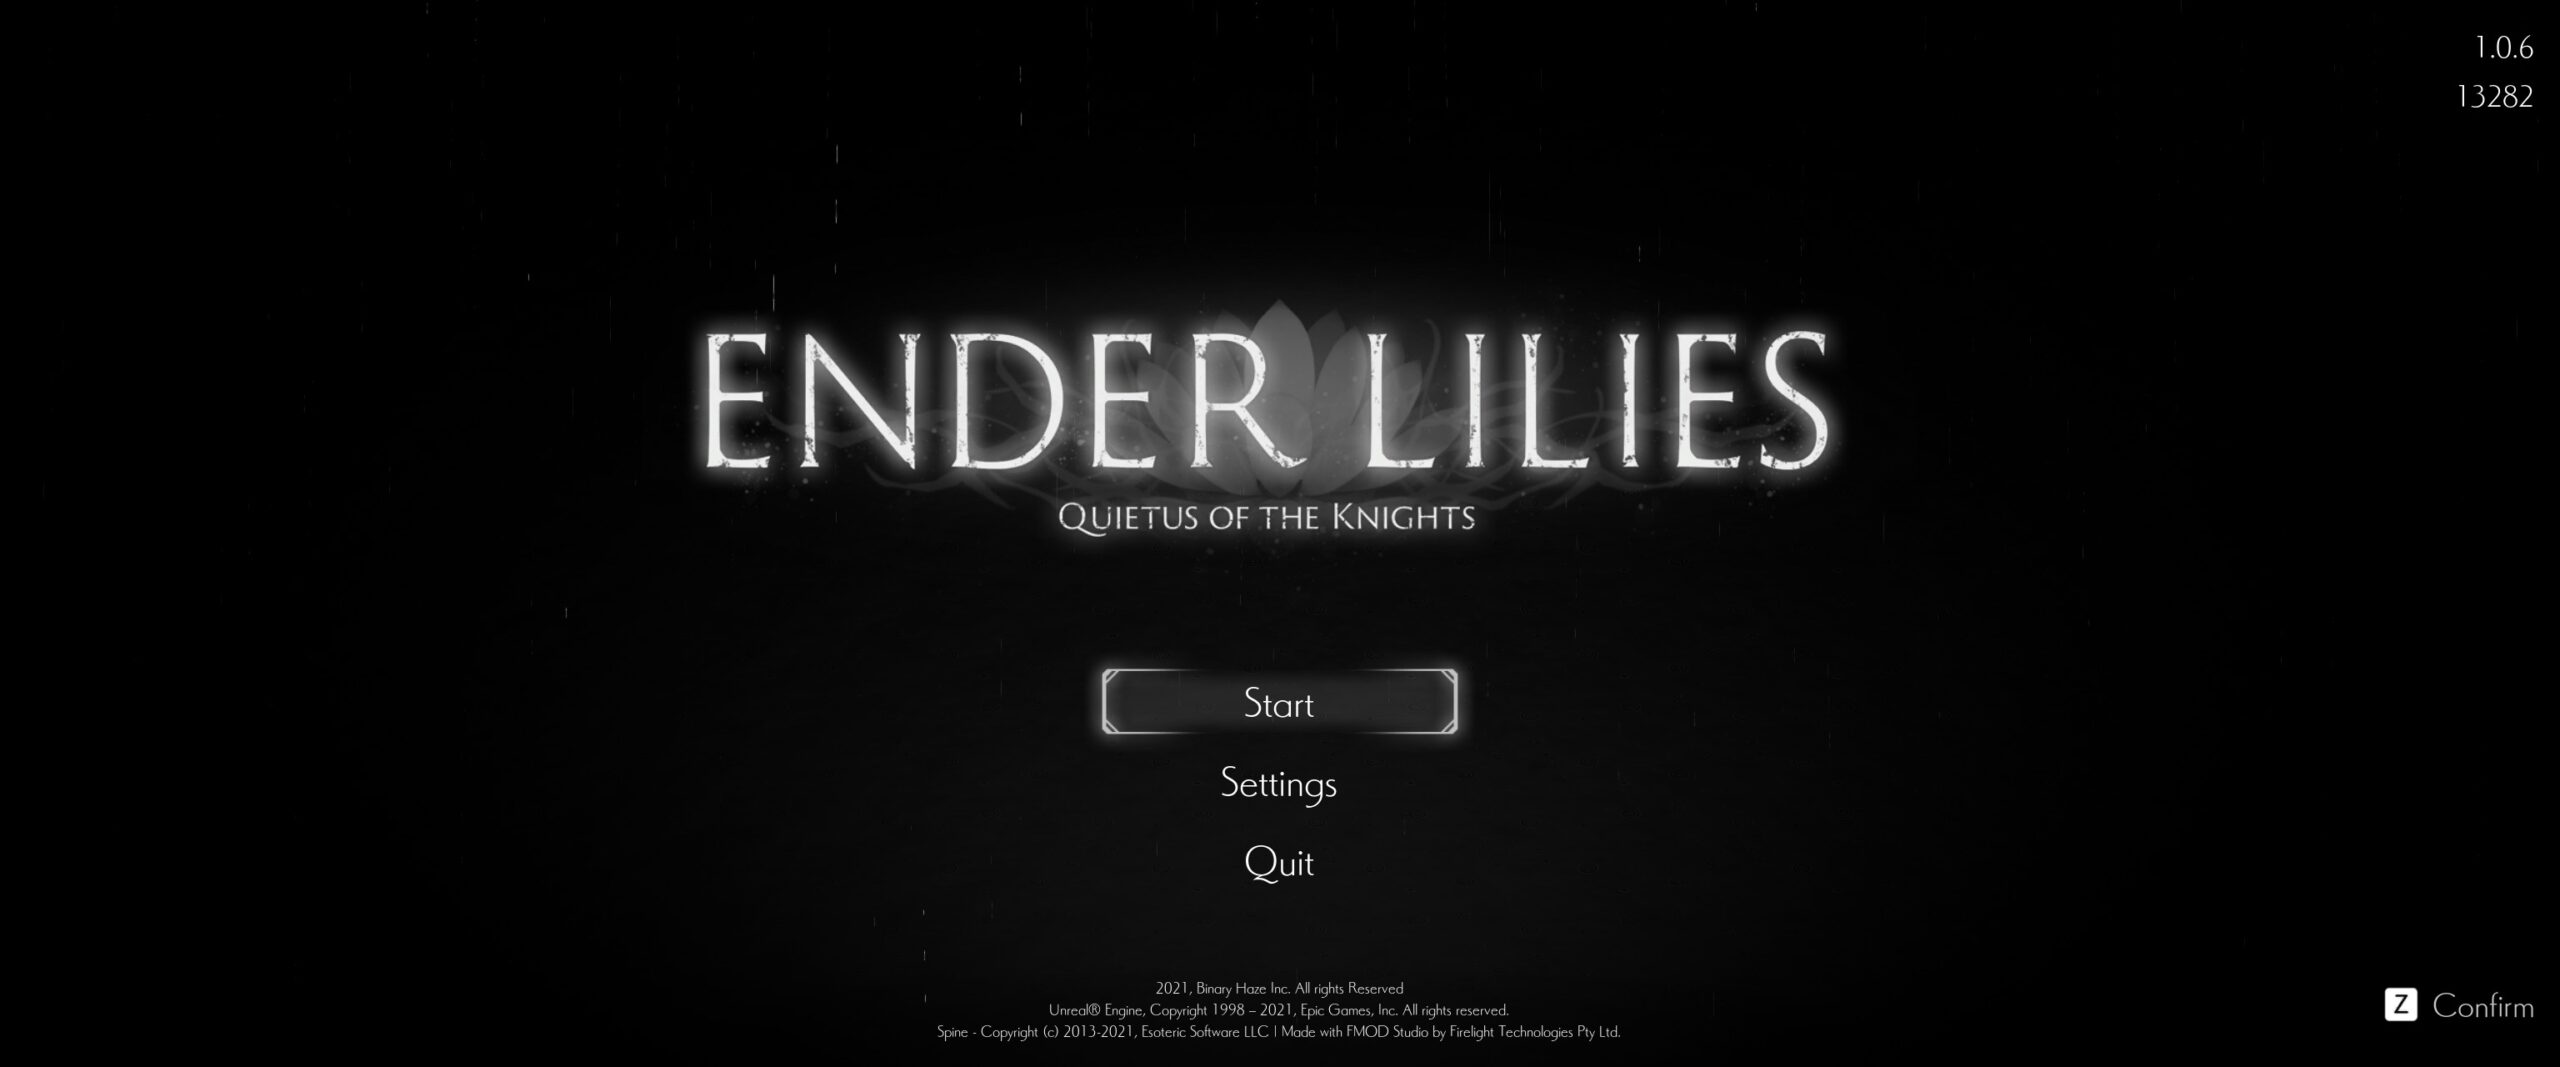 ENDER LILIES: Quietus of the Knights Review